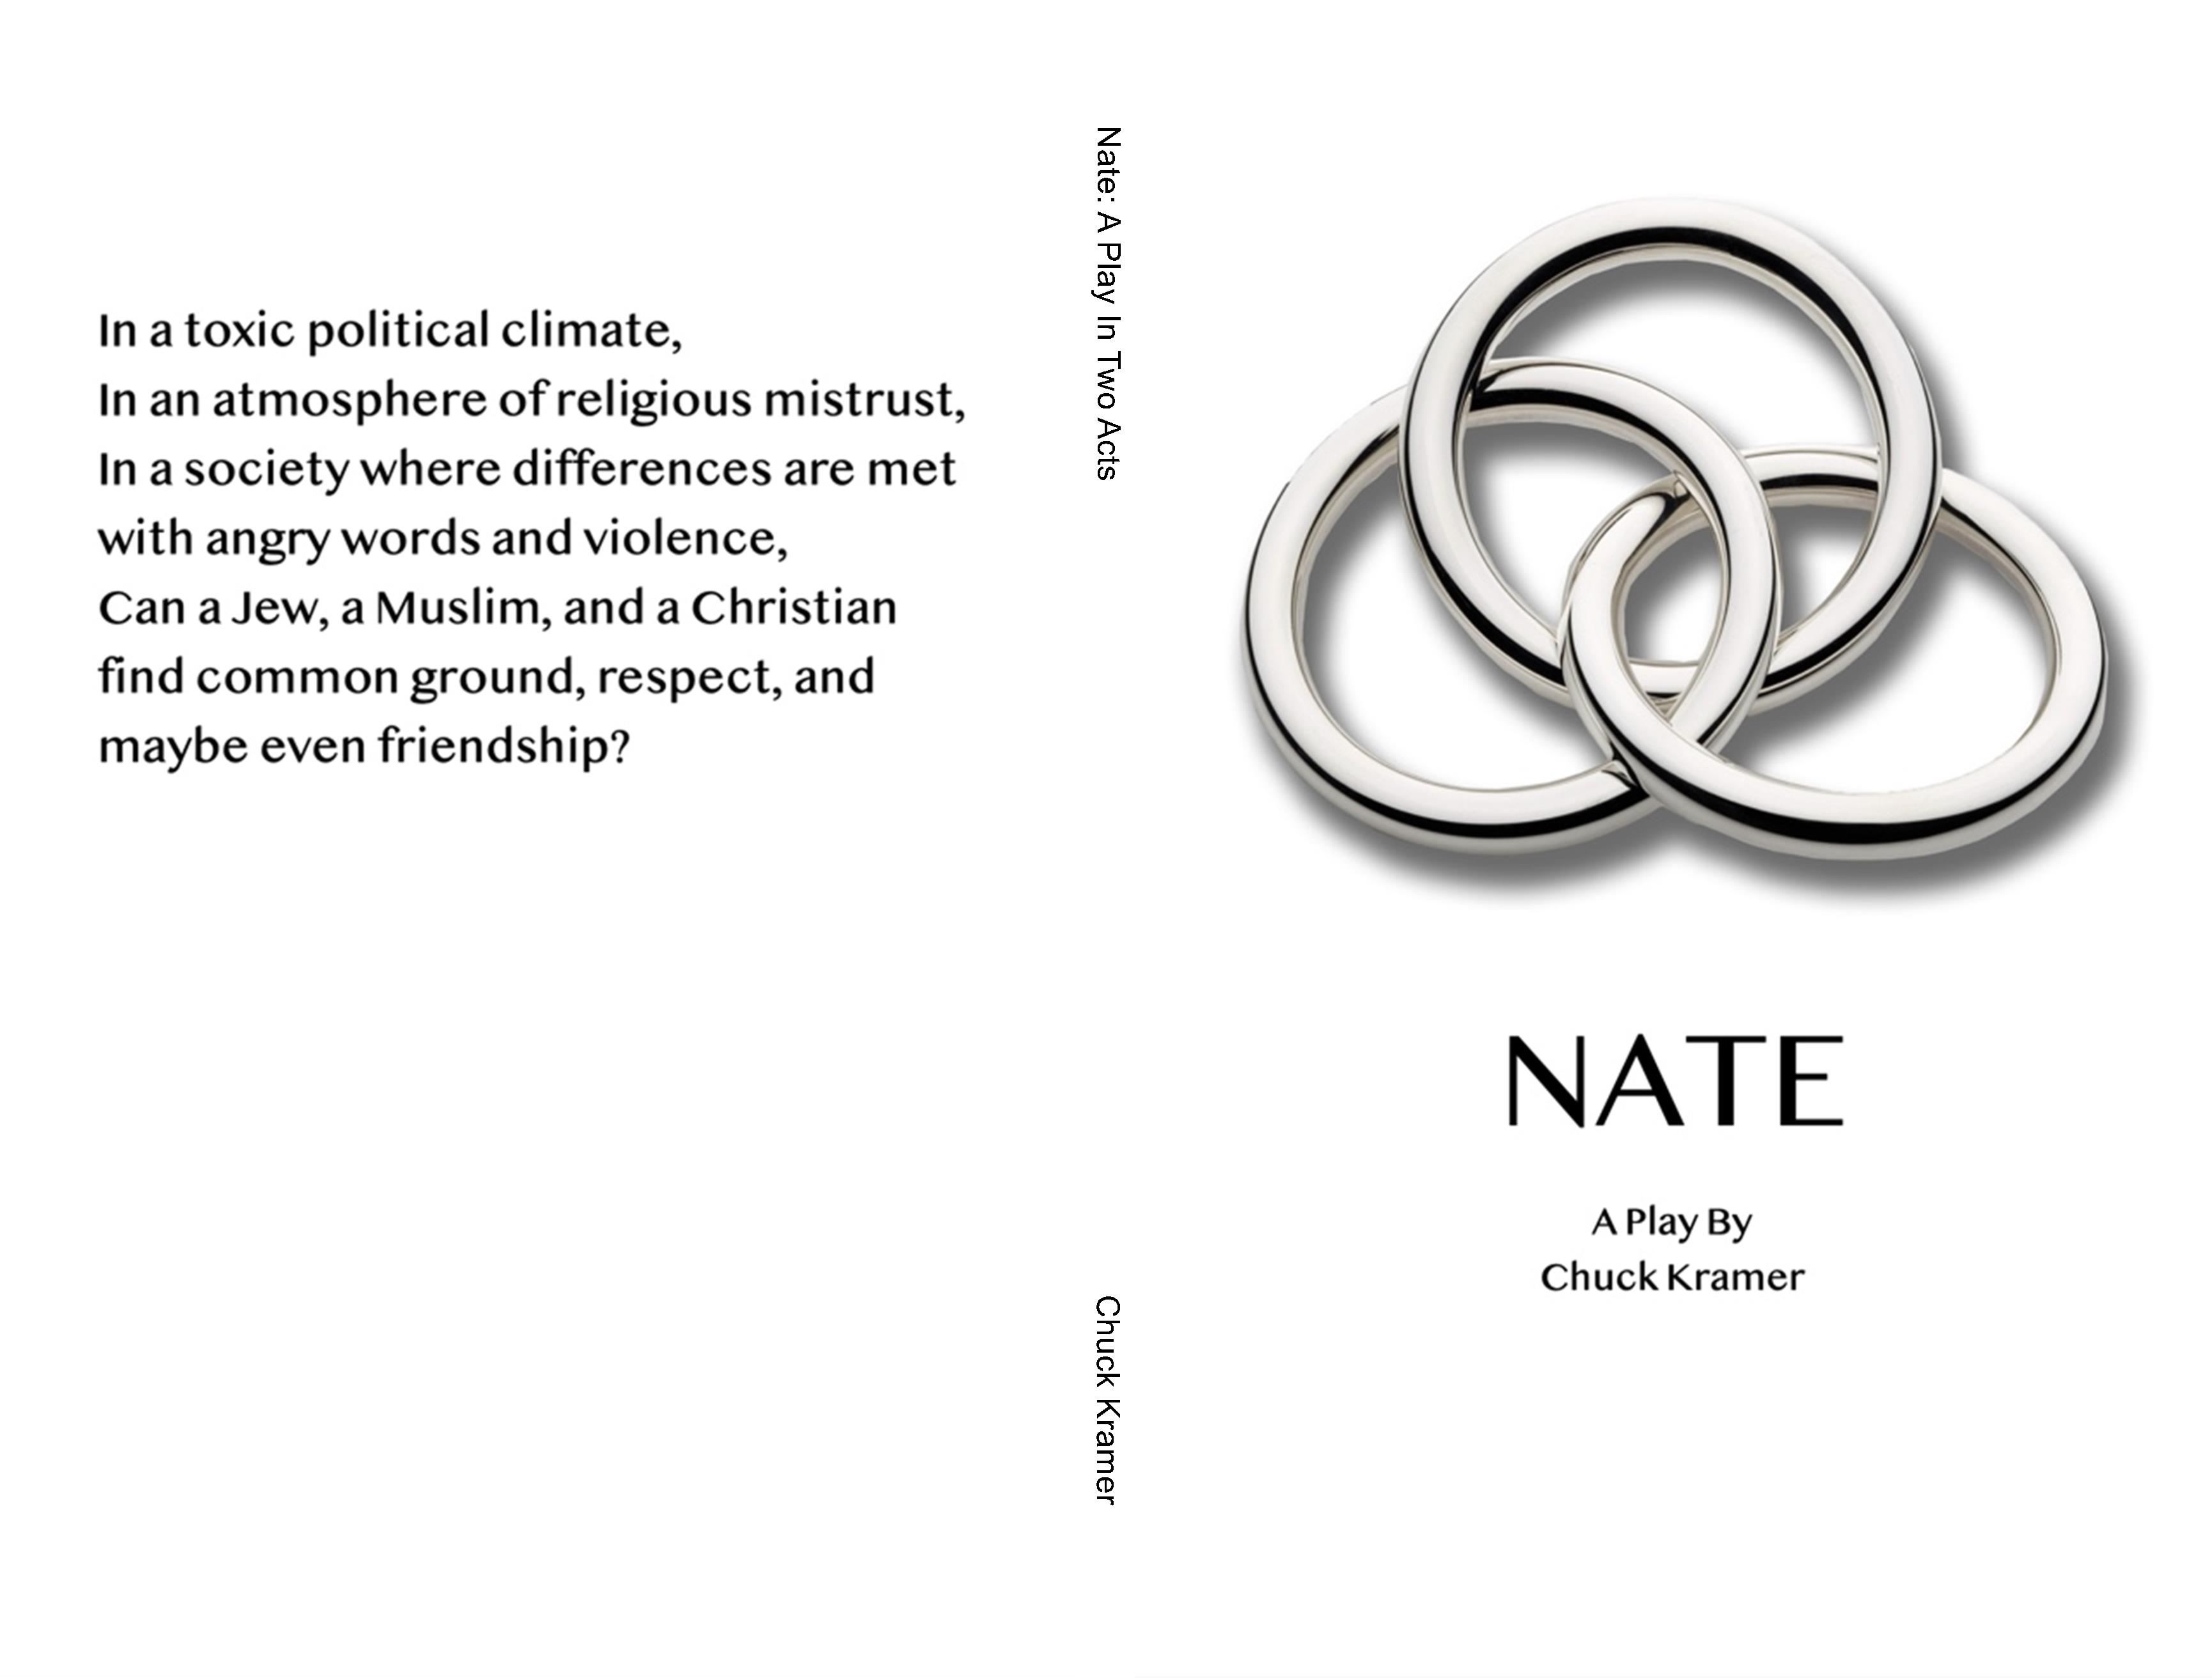 Nate: A Play In Two Acts cover image